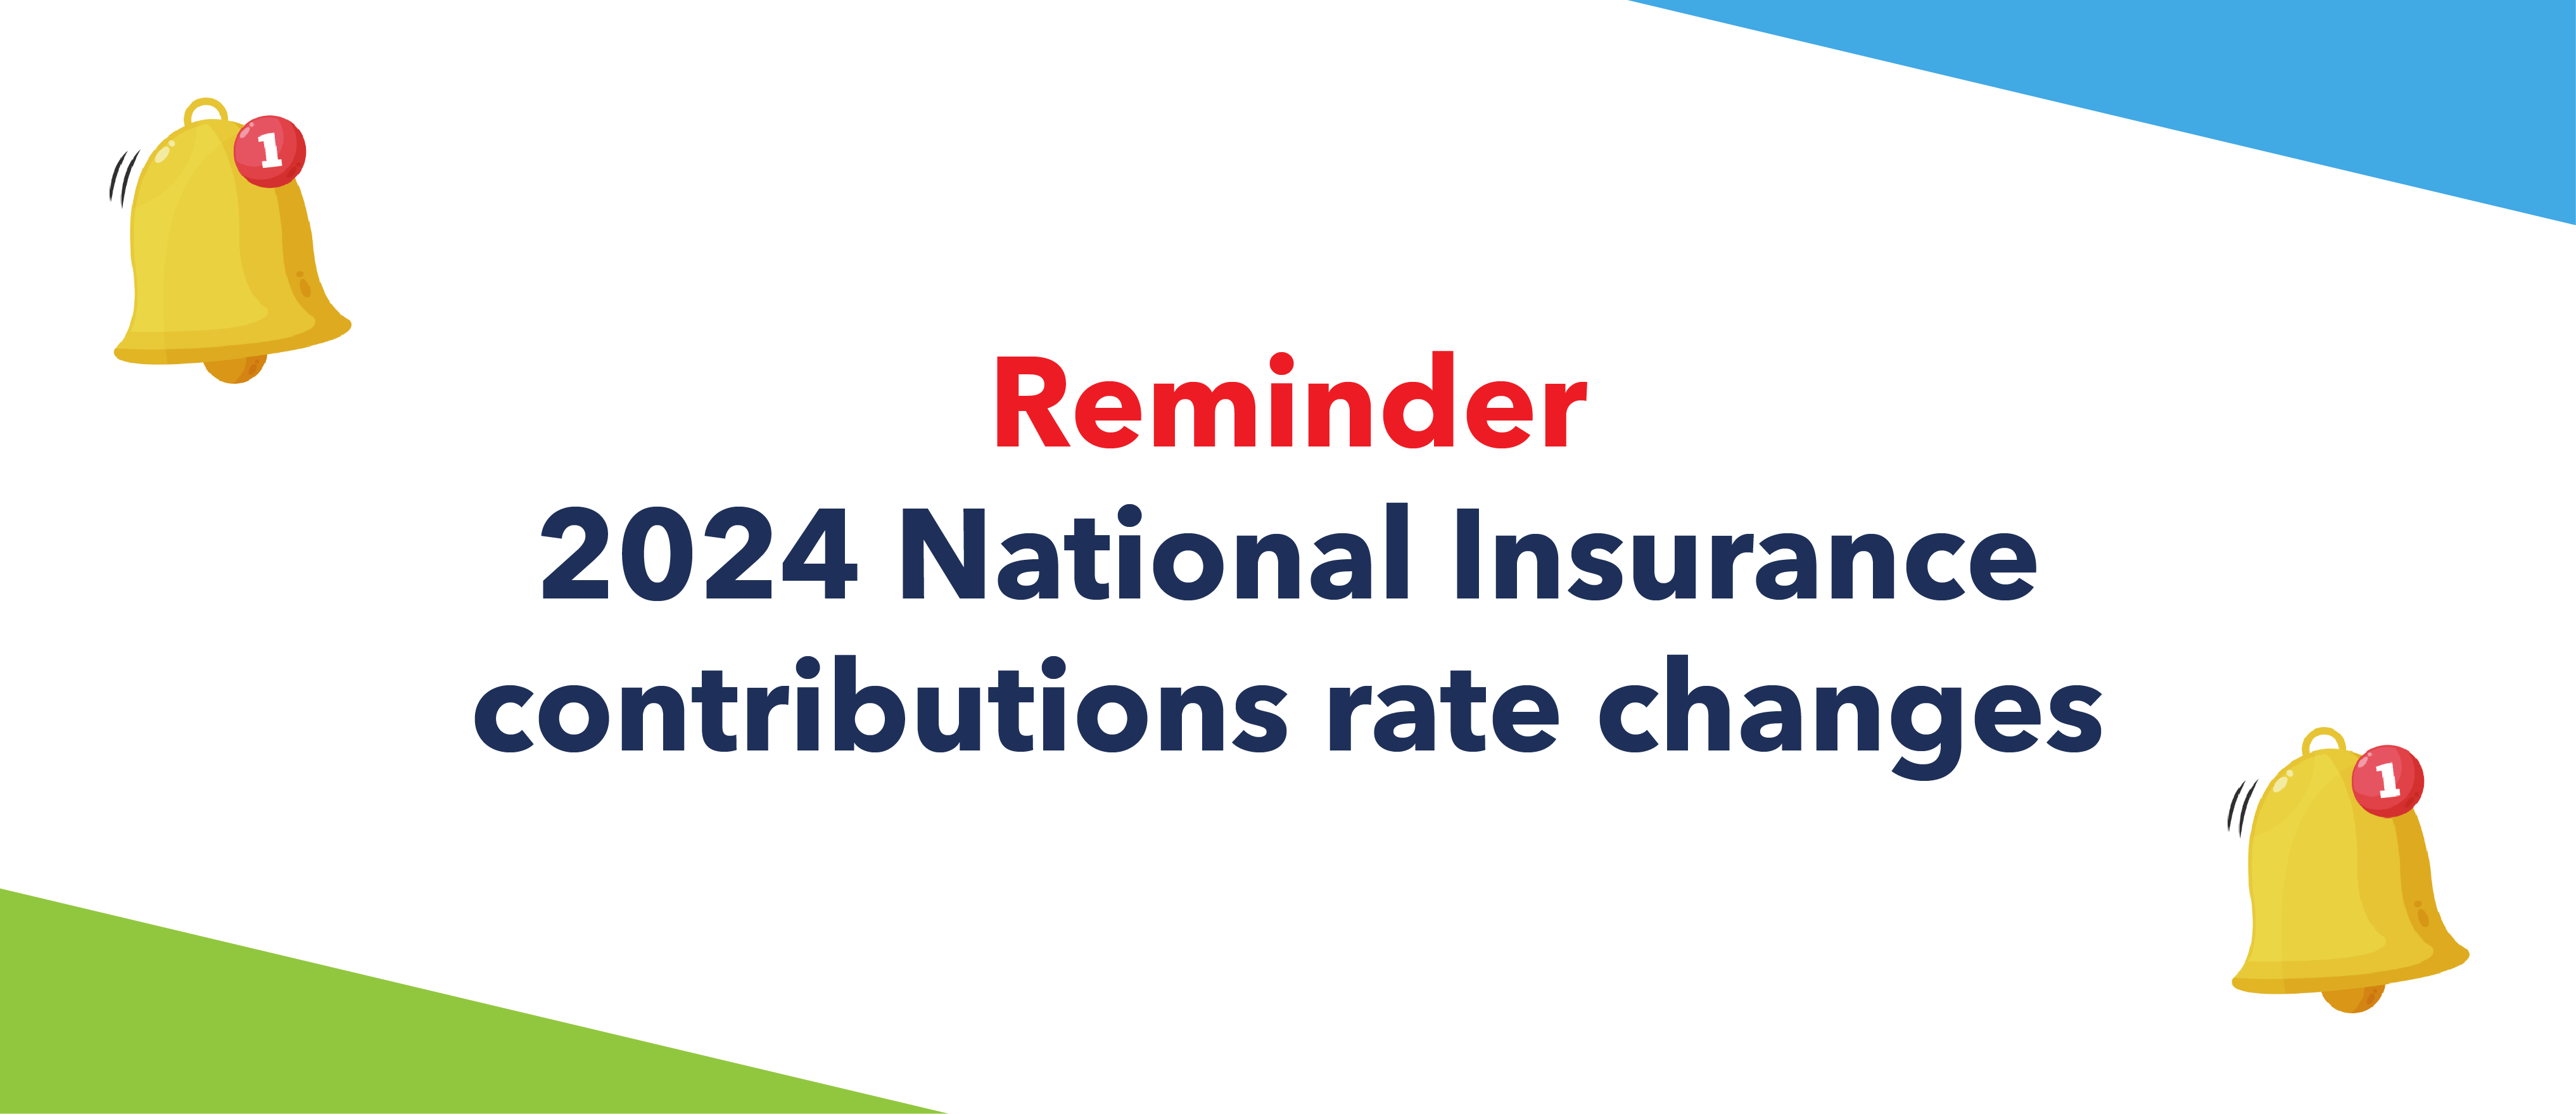 Reminder 2024 National Insurance contributions rate changes